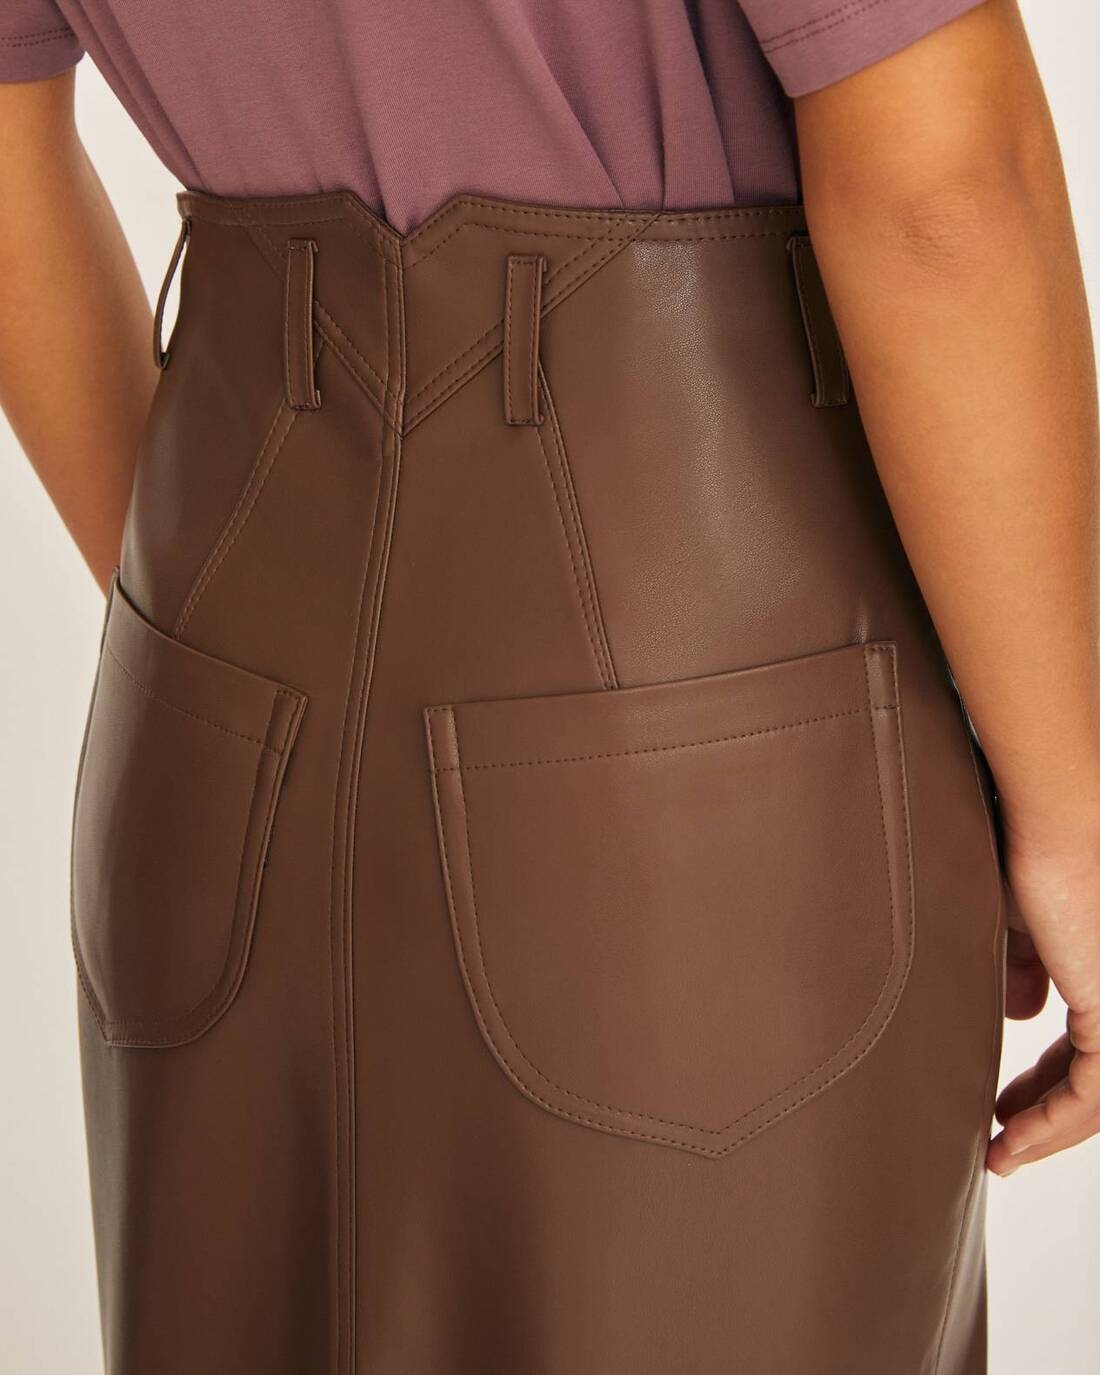 Midi pencil skirt from eco leather